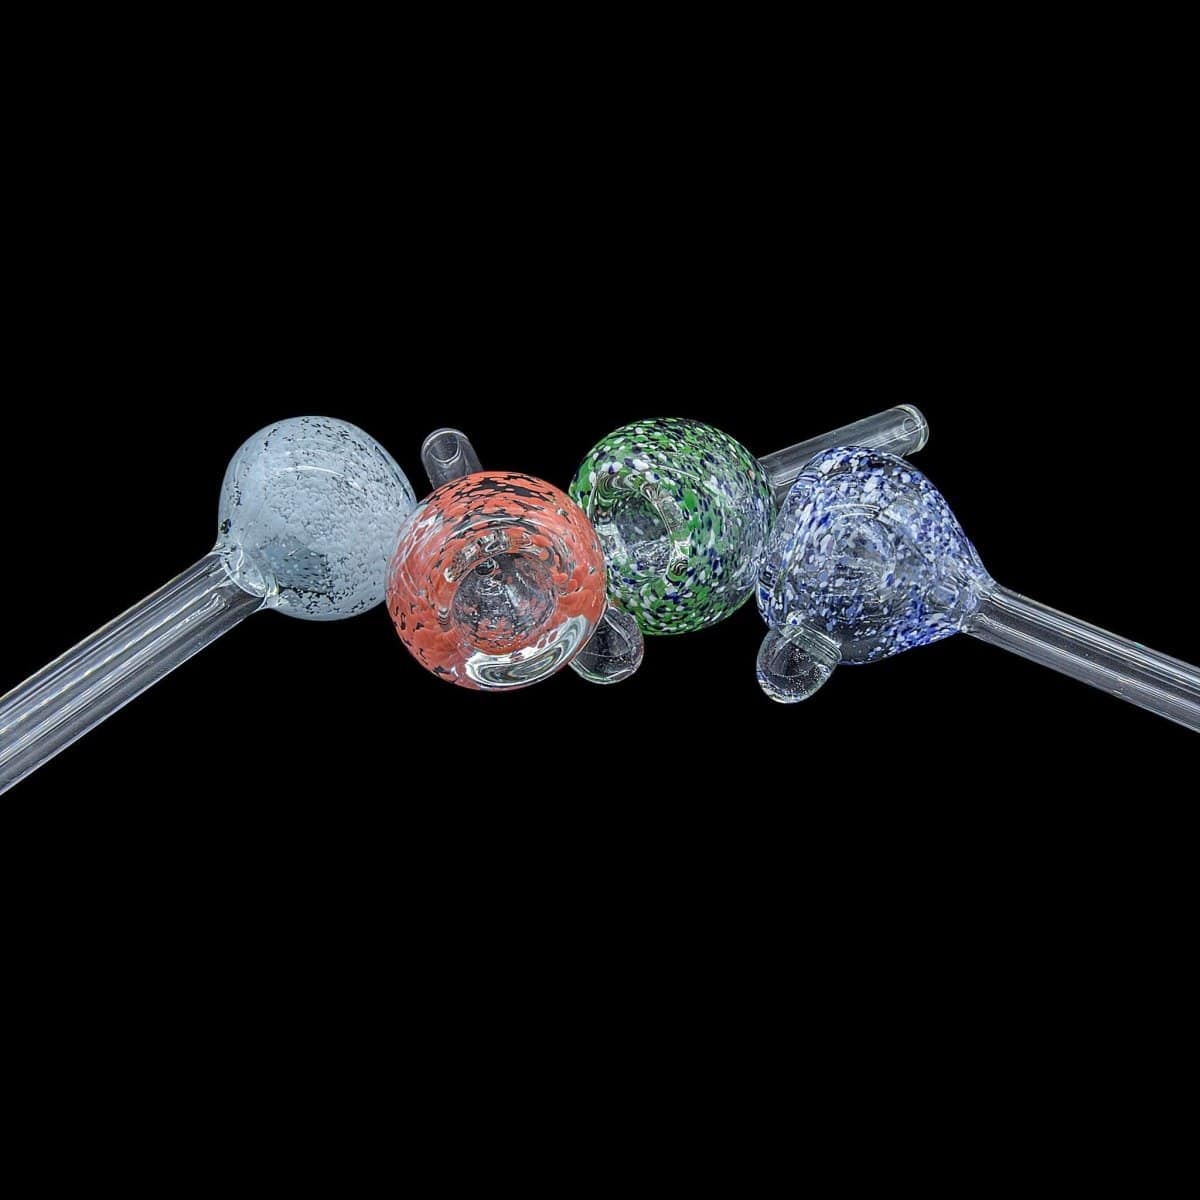 LA Pipes Smoking Accessory Frit Bubble Bowl 9mm Pull-Stem Slide (Various Colors)